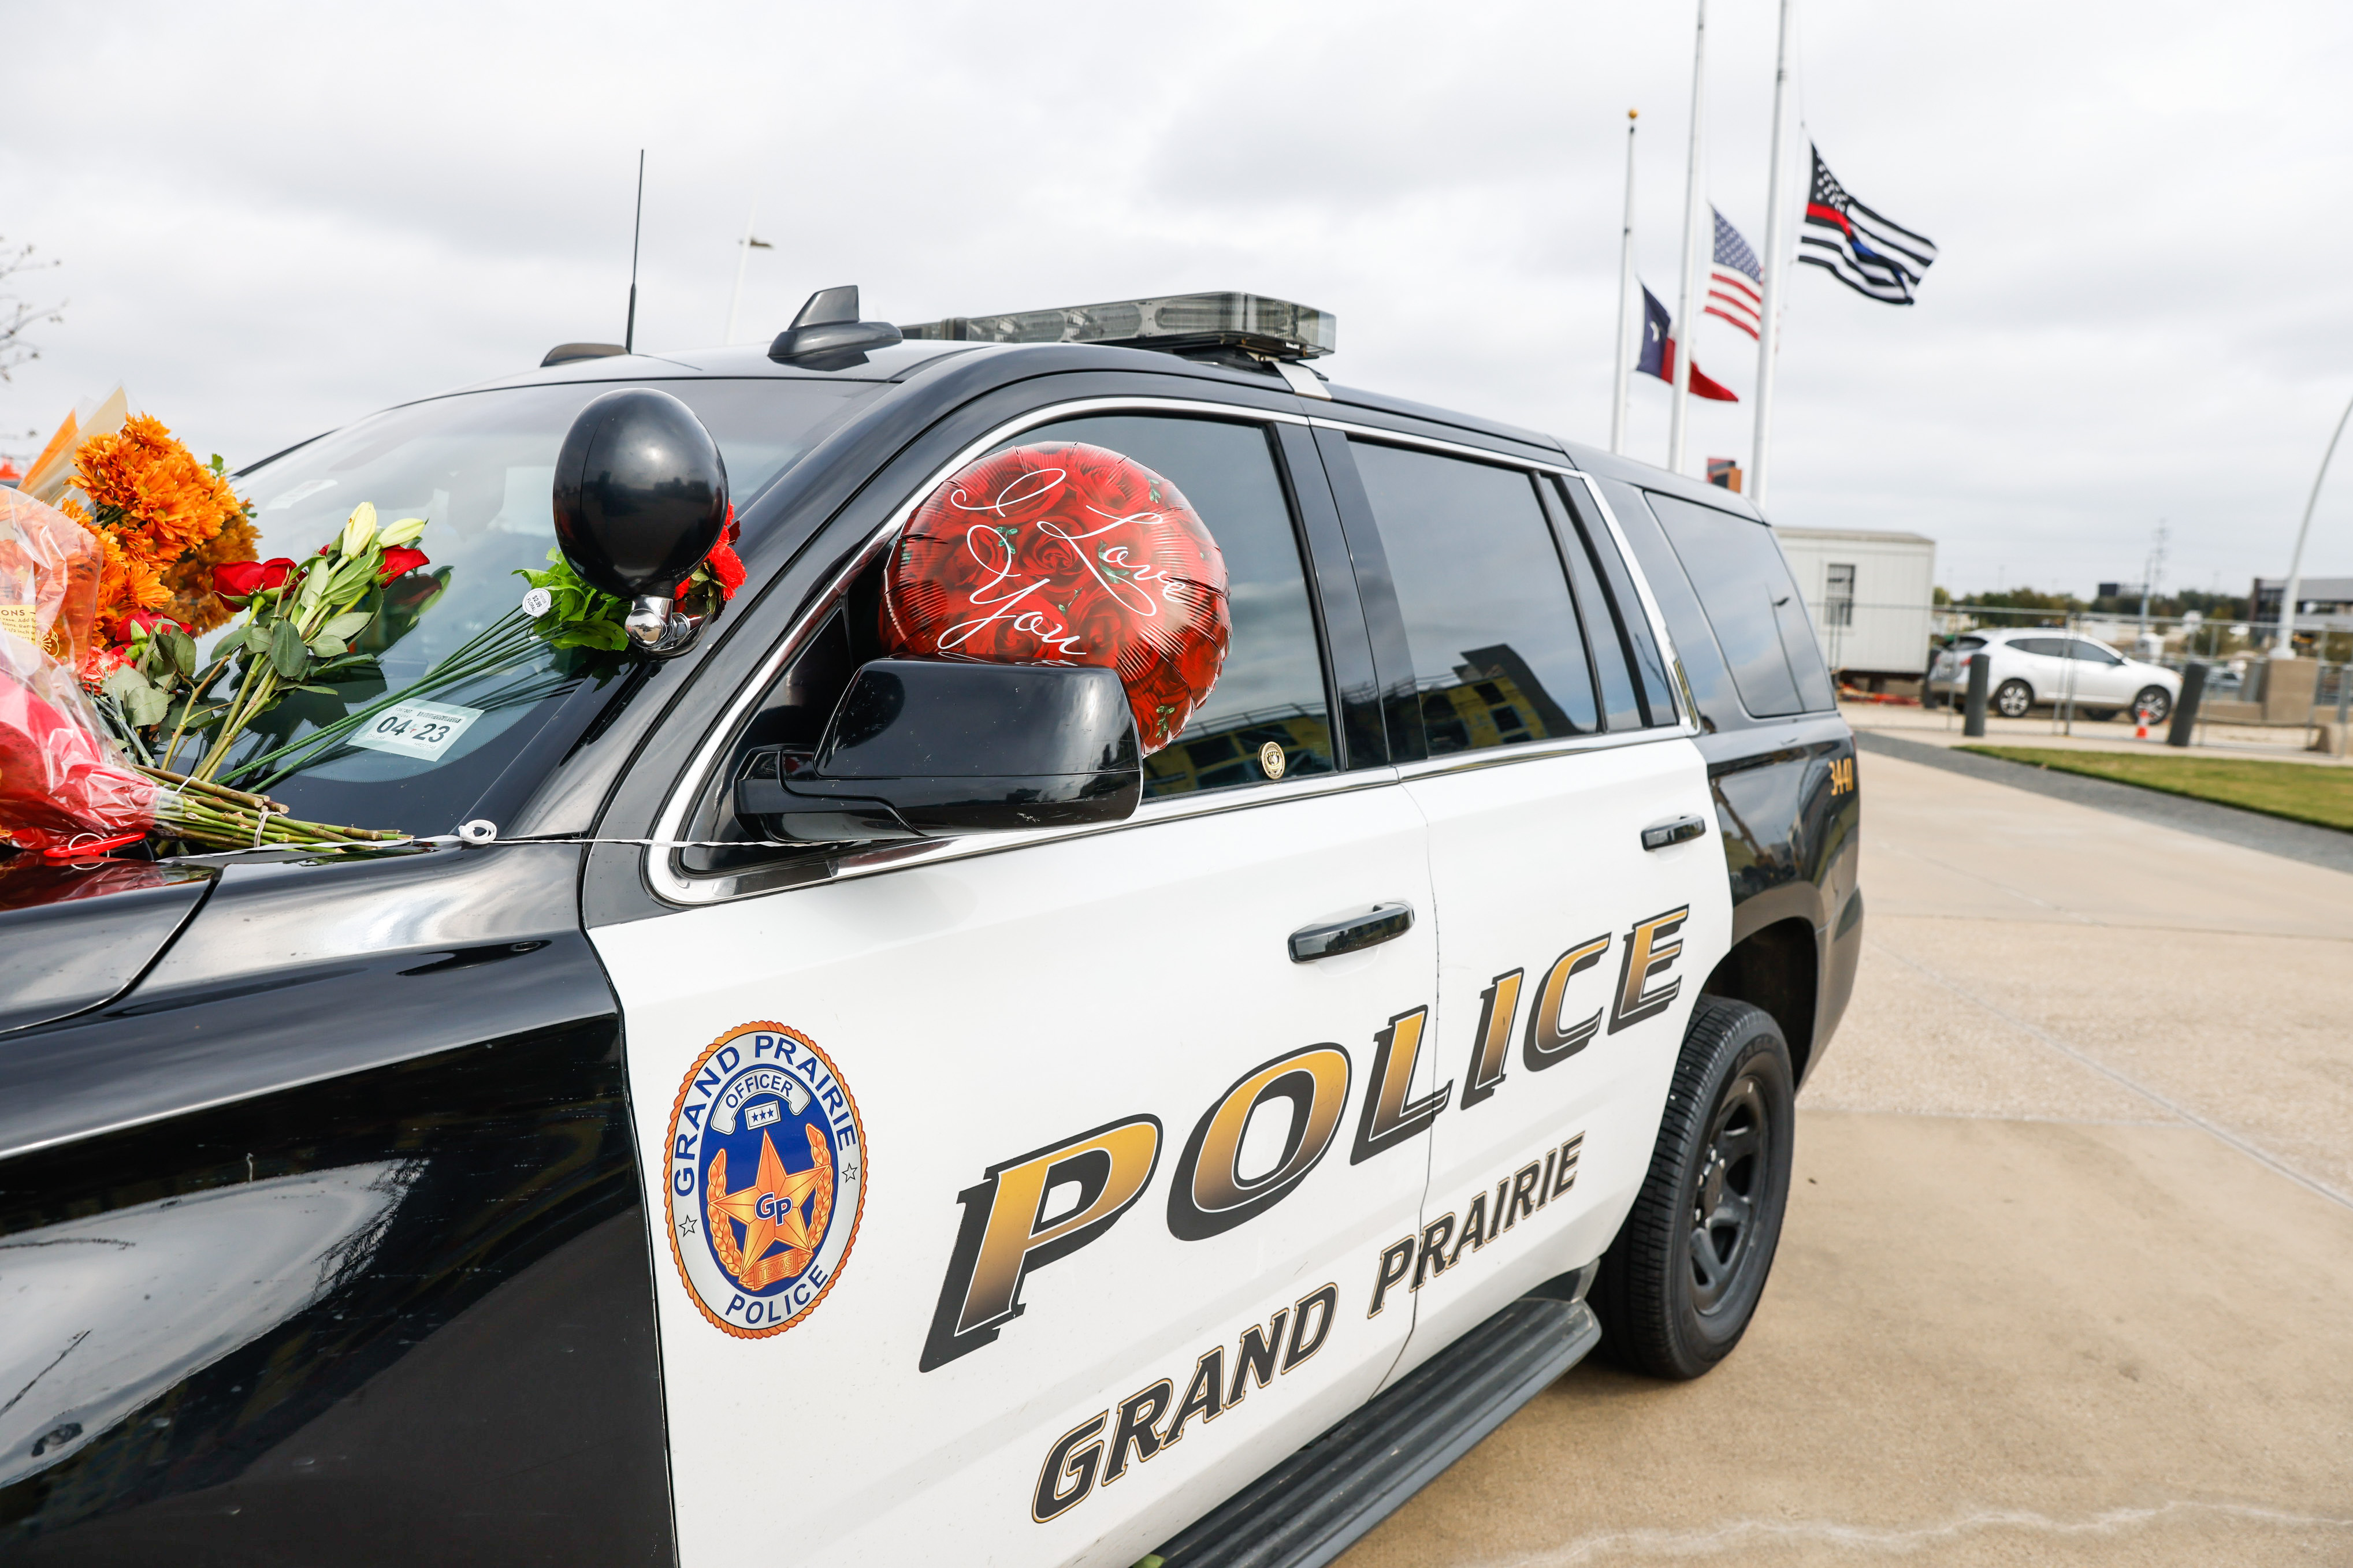 Grand Prairie officer killed while chasing car with fake paper tags, police  say